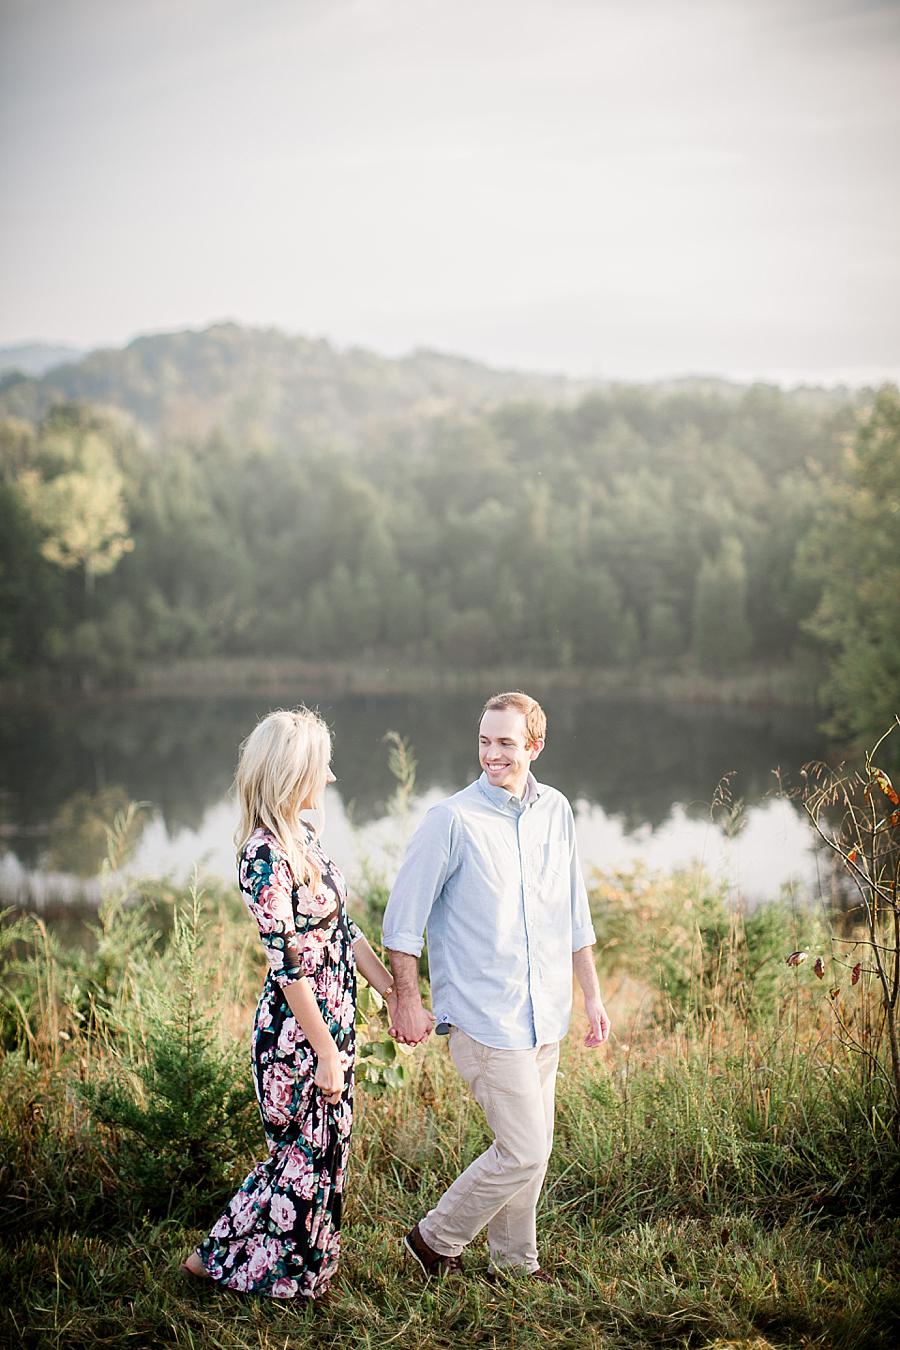 Floral maxi dress at this Family Farm Engagement Session by Knoxville Wedding Photographer, Amanda May Photos.